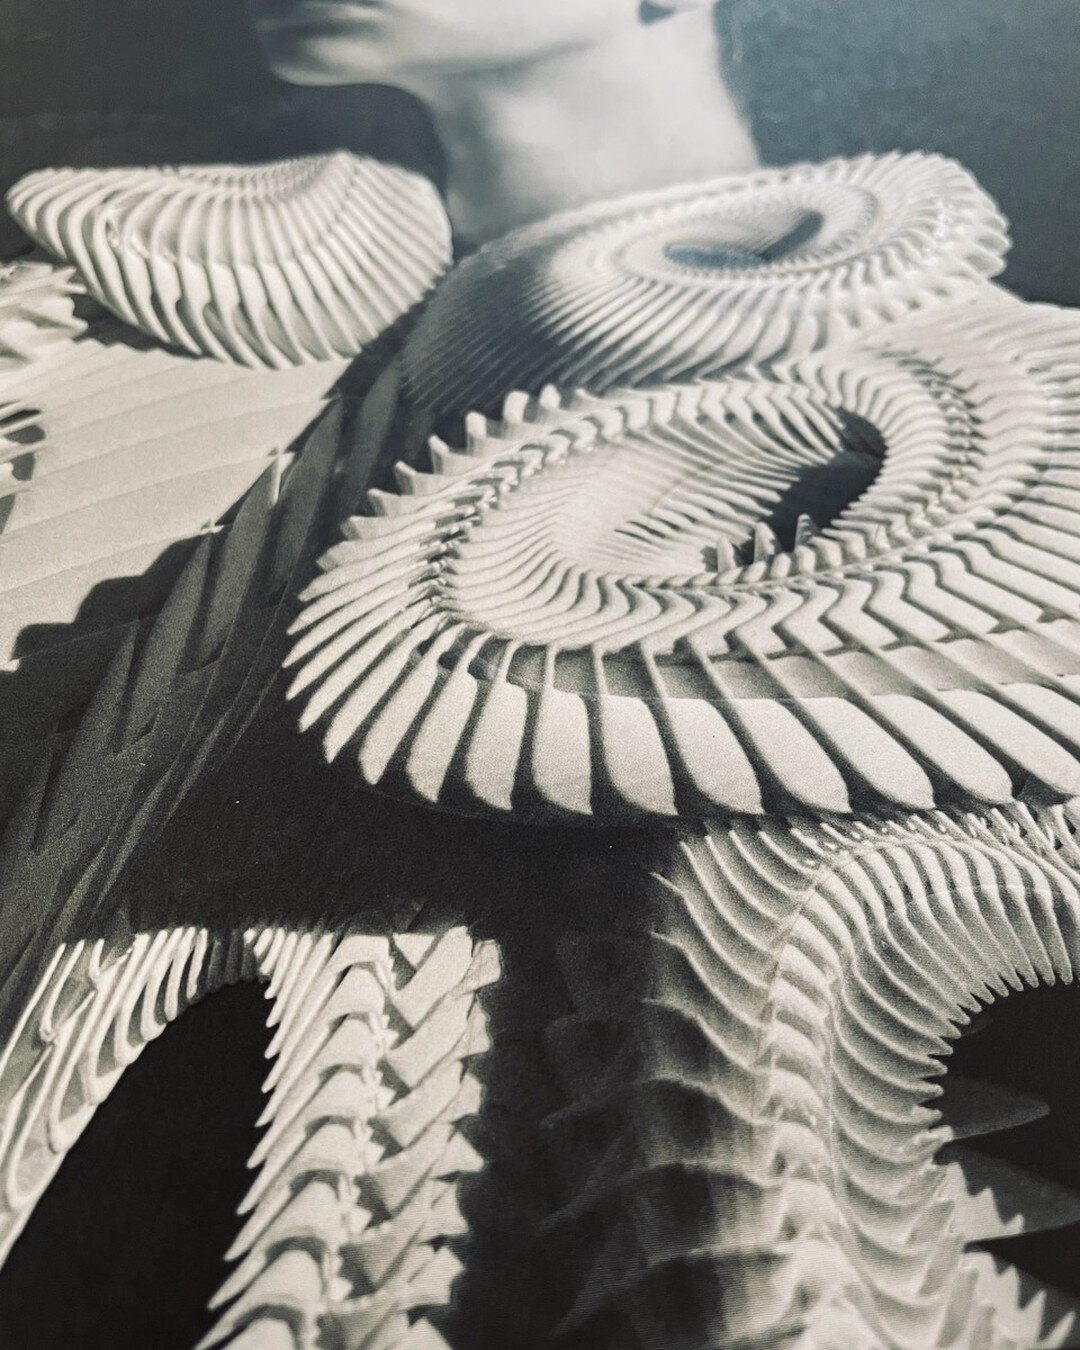 Oh my gawd, I'm utterly *entranced* with the new artbook from @irisvanherpen &quot;Sculpting the Senses&quot;!

I've been in love with van Herpen's creations and transdisciplinary design philosophy for so many years, I literally squealed when I heard